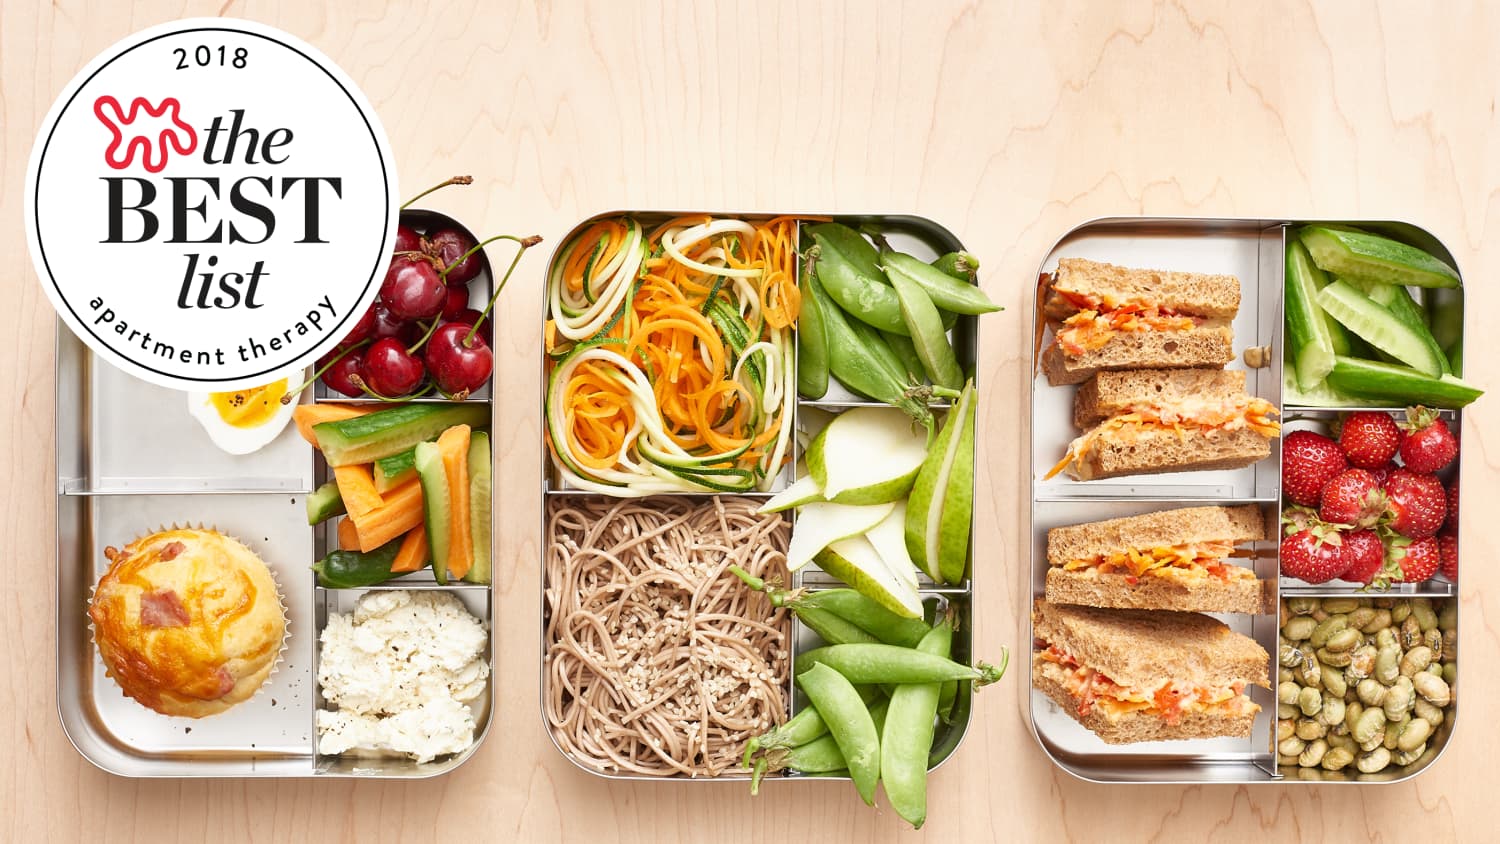 Pack a Perfect Lunch with Rubbermaid LunchBlox Containers - Clutterbug